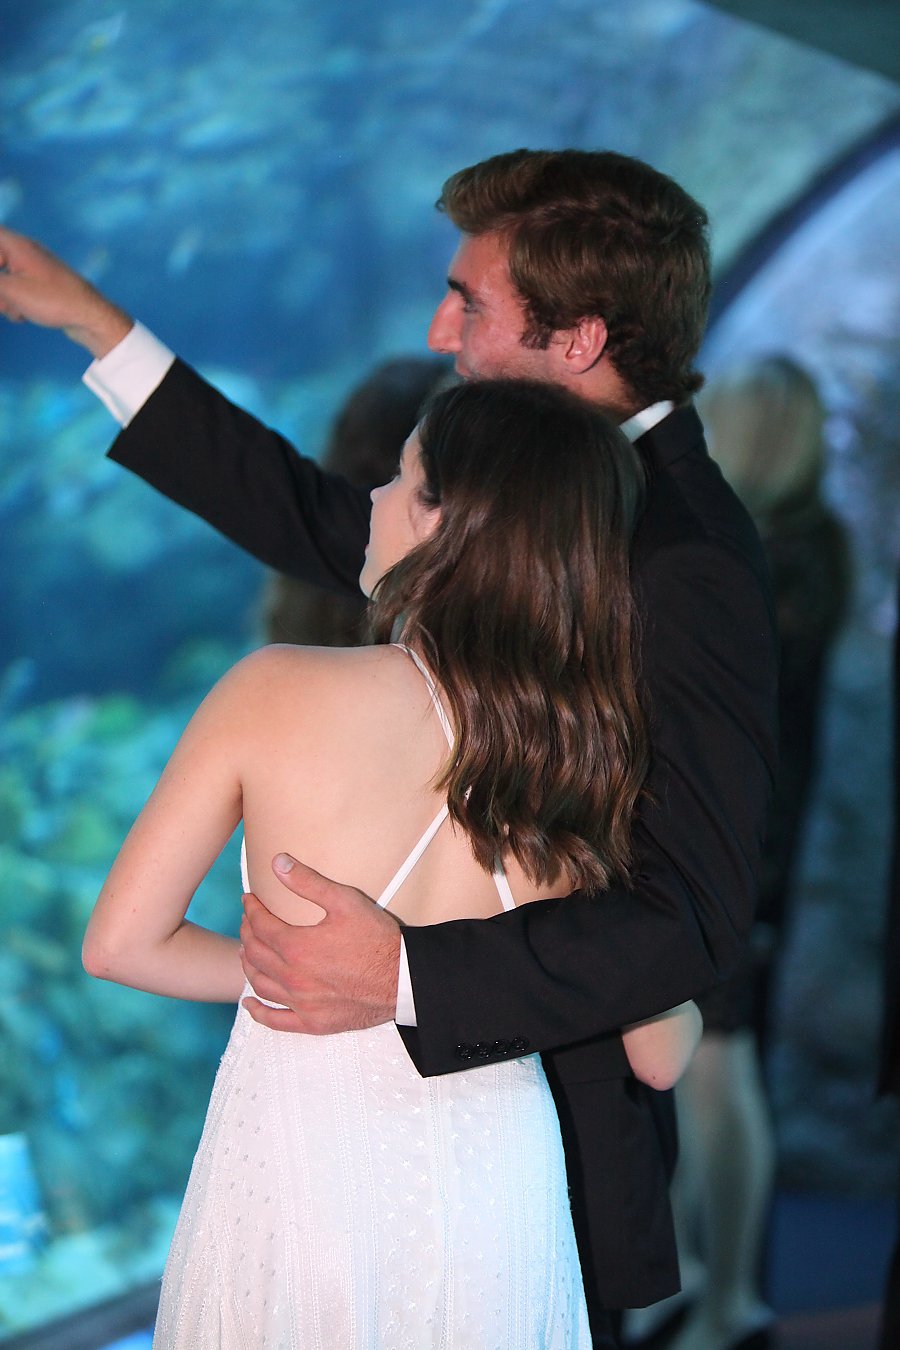 Man and woman in formal wear looking at fish tank